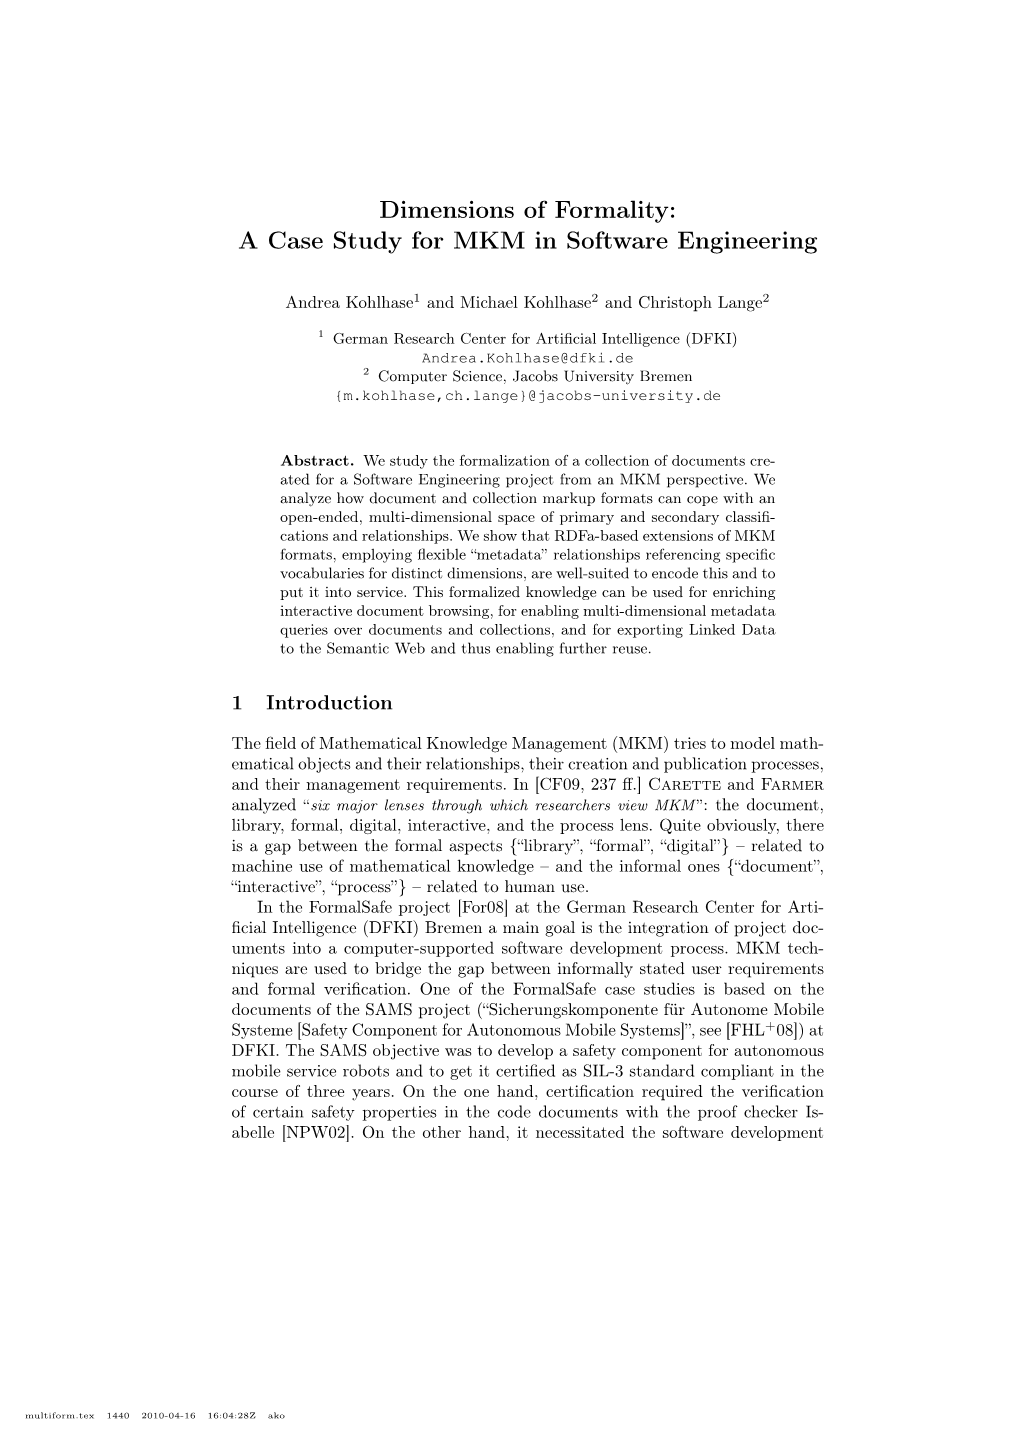 Dimensions of Formality: a Case Study for MKM in Software Engineering